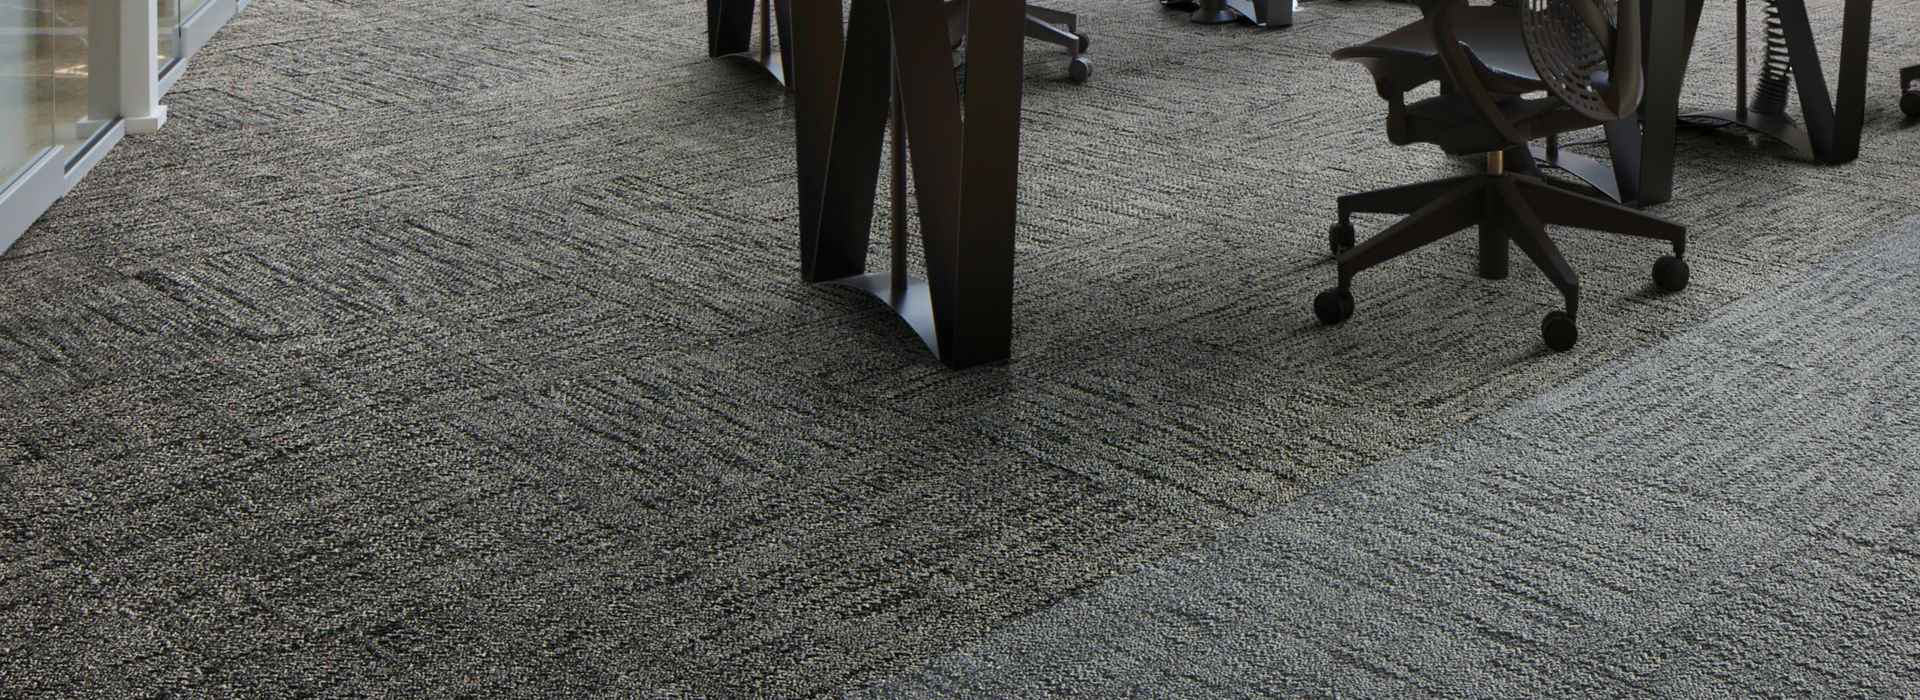 Interface Mirror Mirror carpet tile in open office space with tables and chairs image number 1